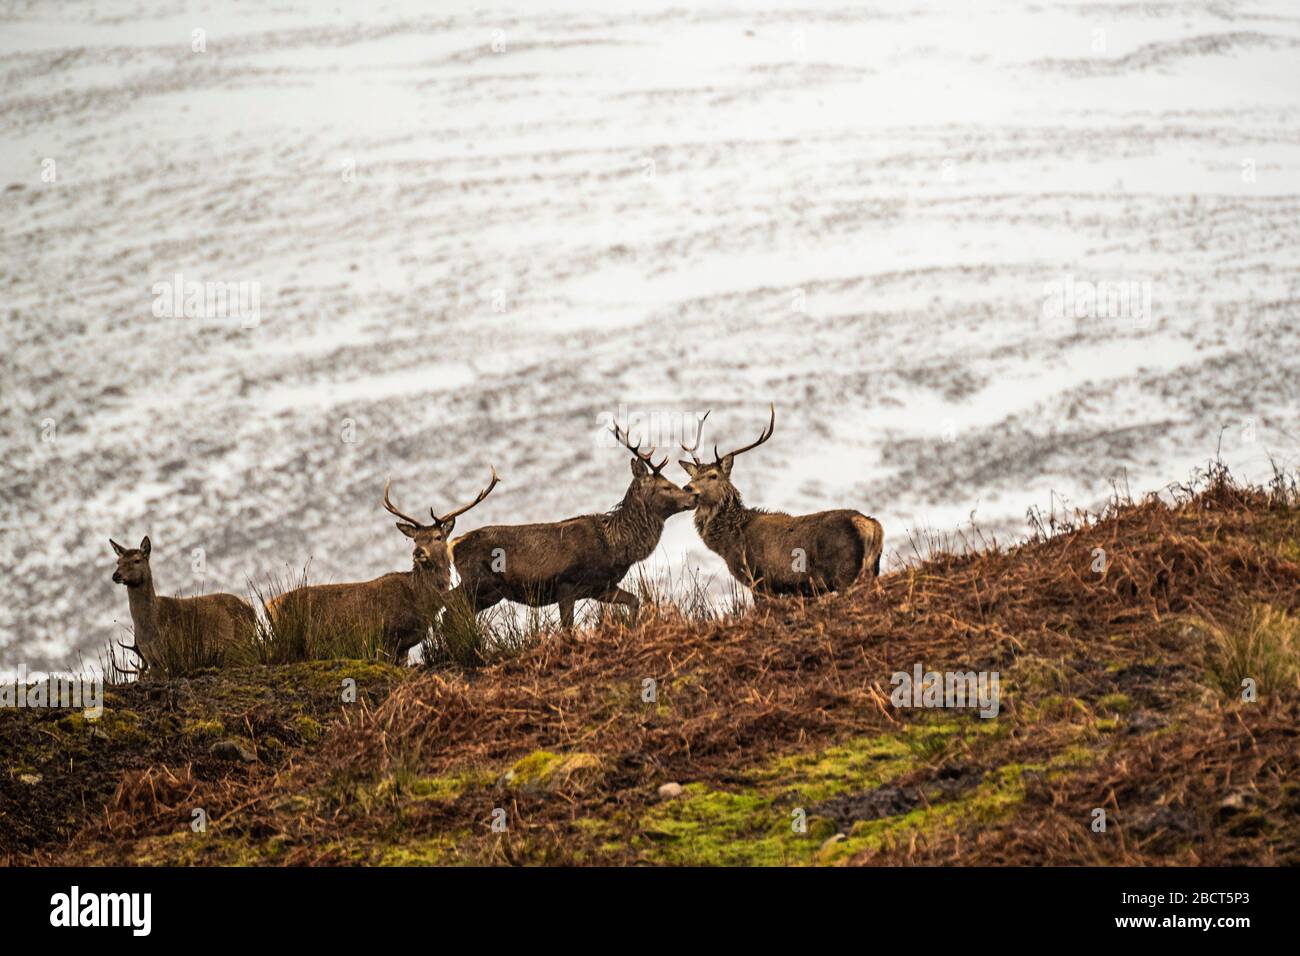 Scottish red deer on the snowy surrounding, Highlands, Scotland Stock Photo